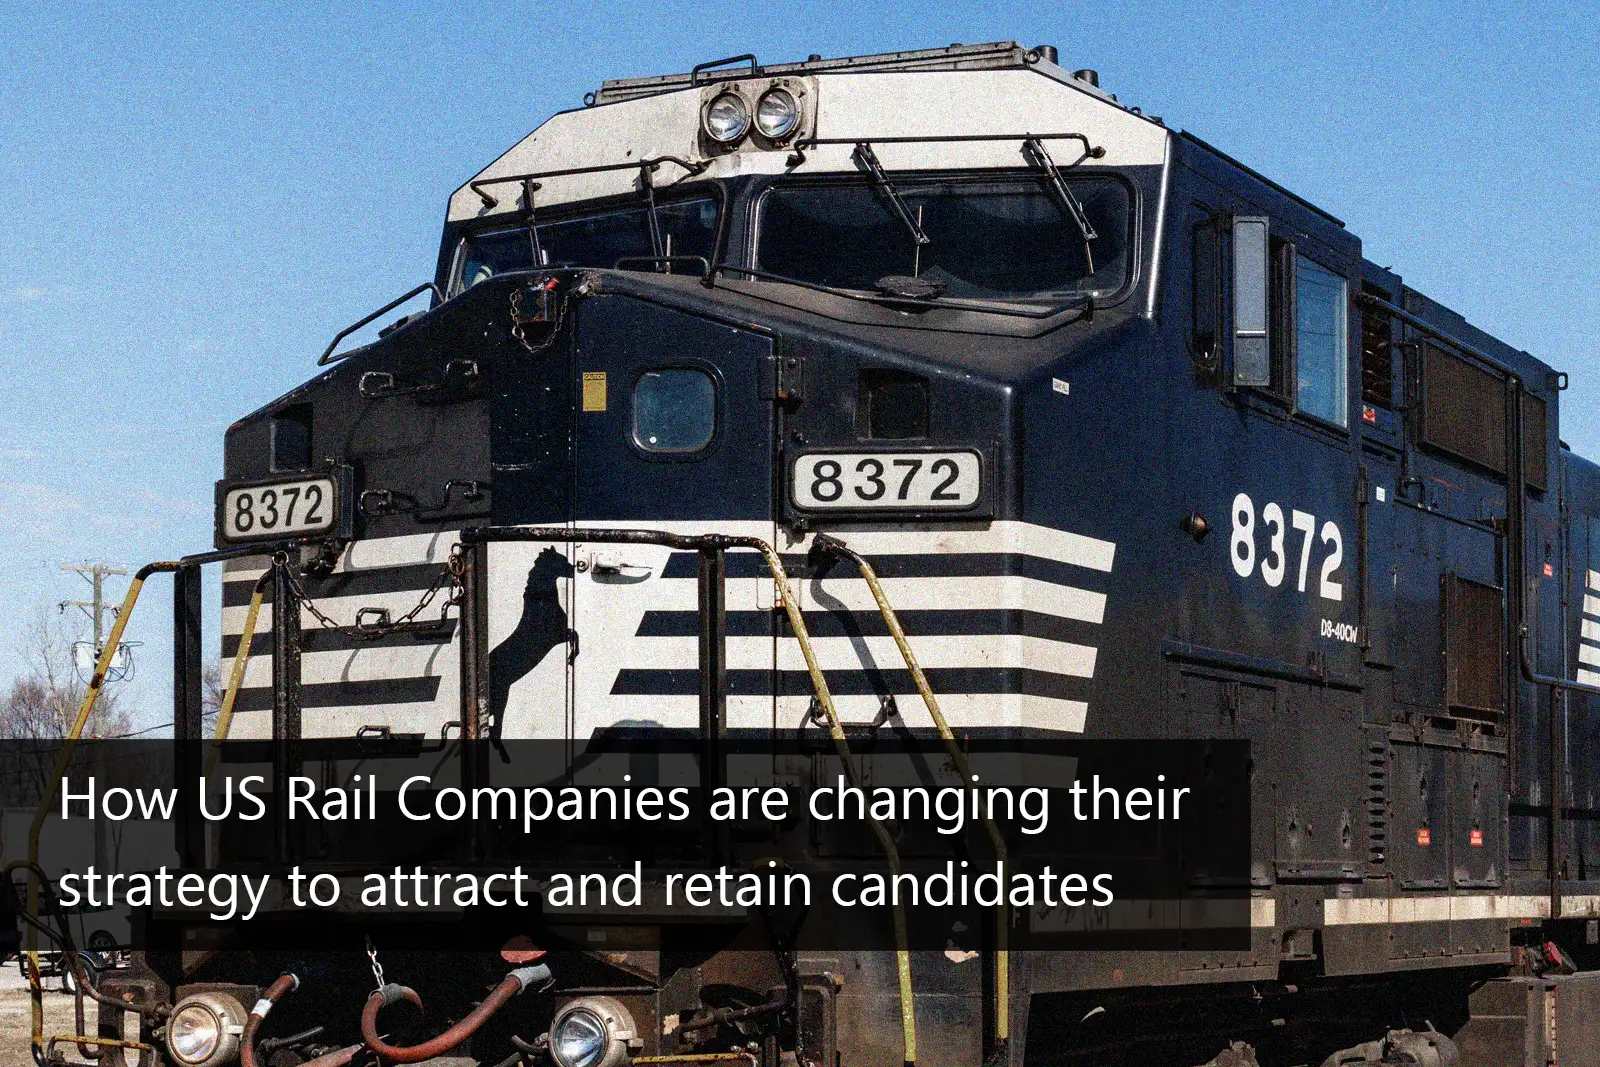 US Rail Companies' Strategies to Attract and Retain Candidates